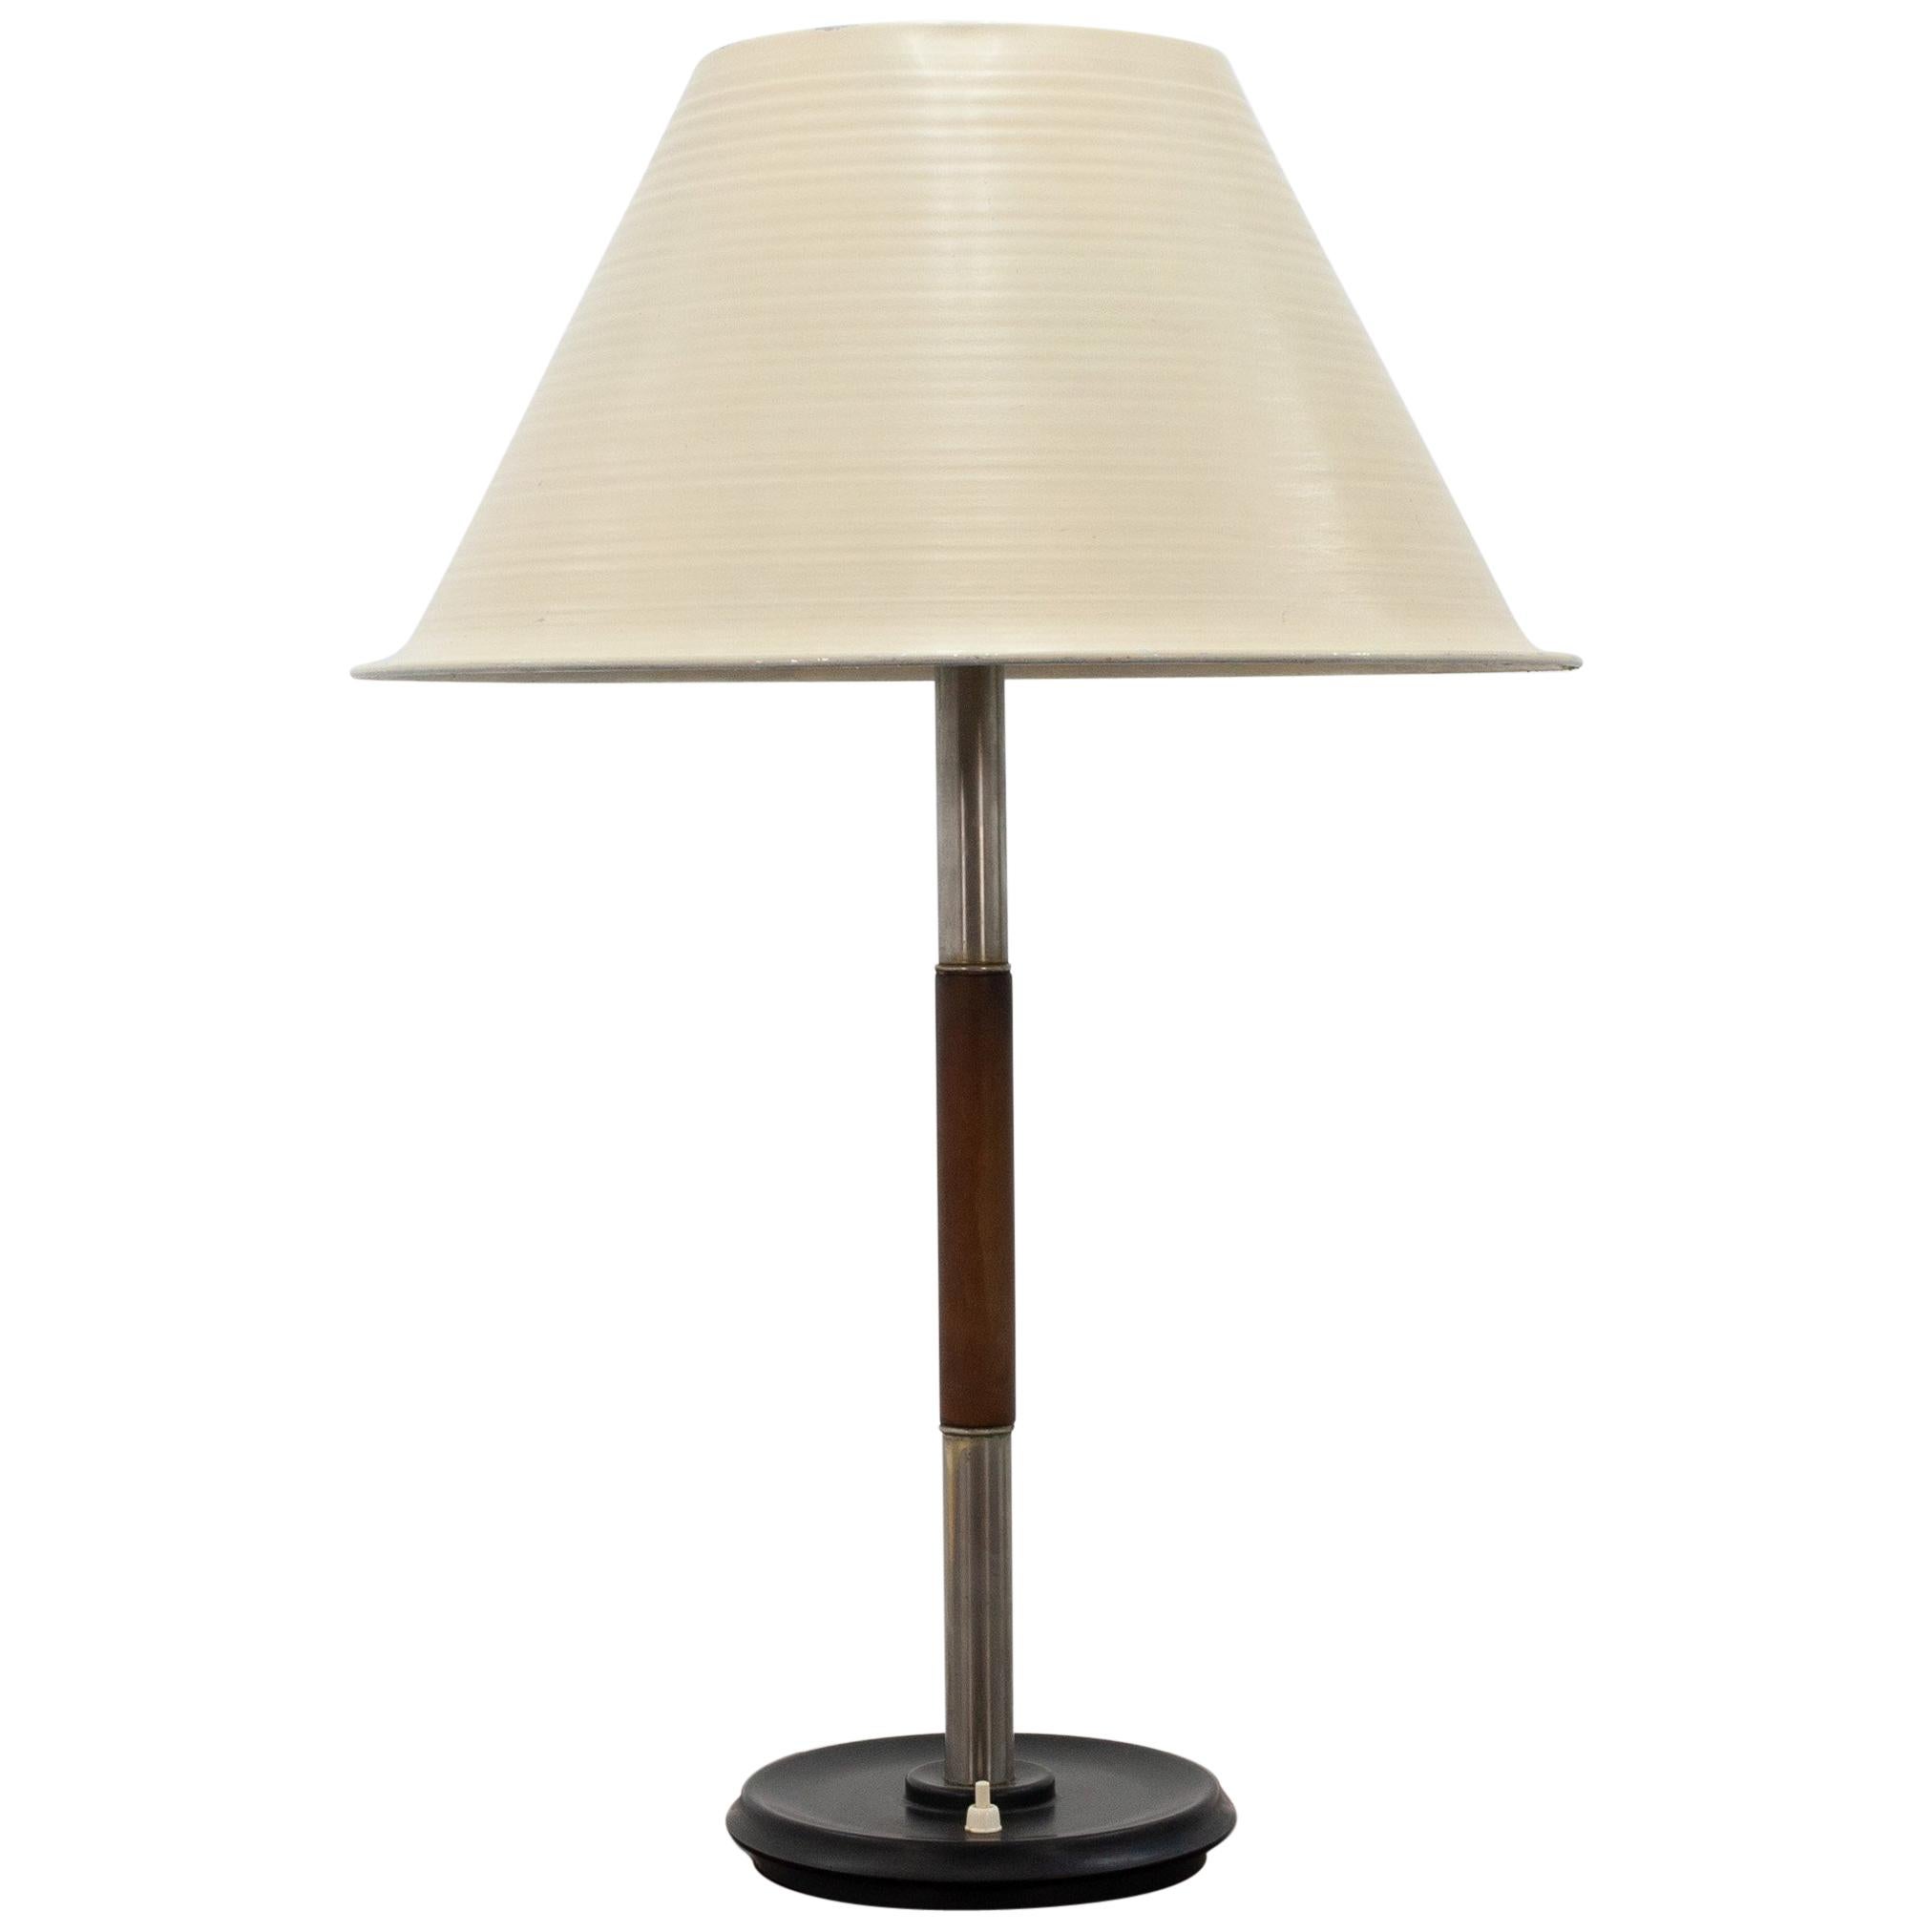 Giso Model 5020 Table Lamp by W.H. Gispen For Sale